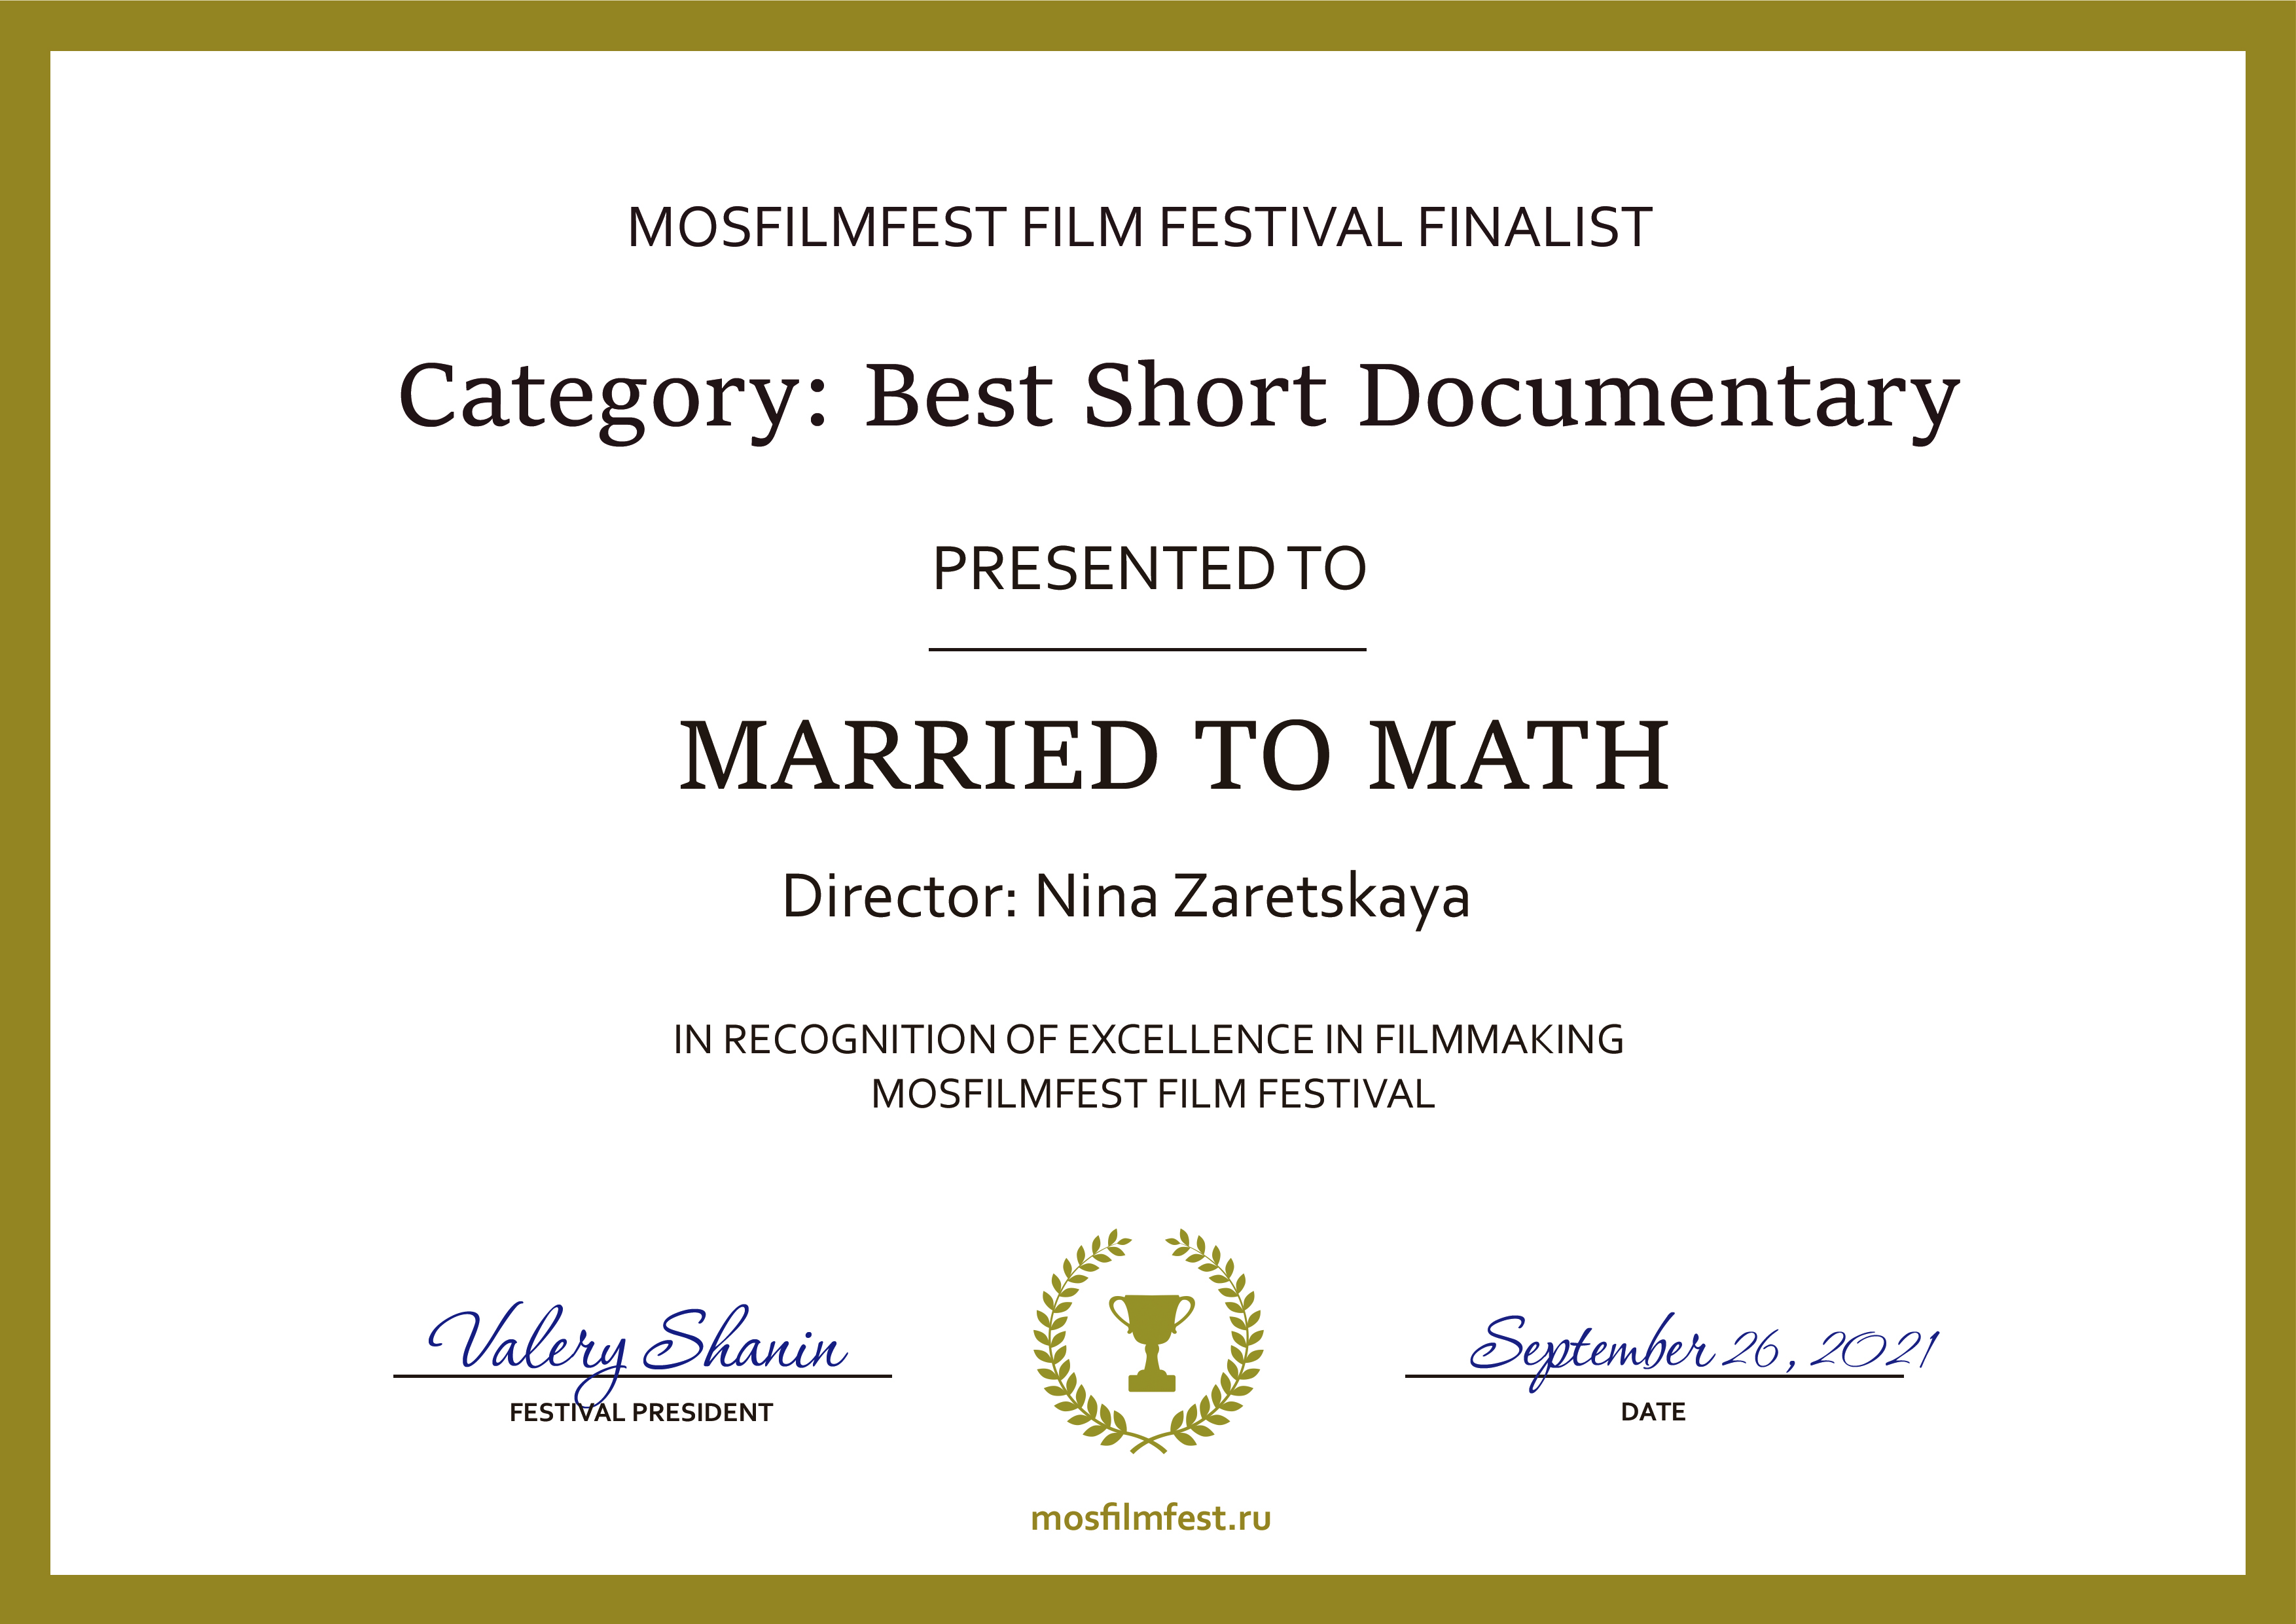 mosfilmfest film festival finalist Married to Math